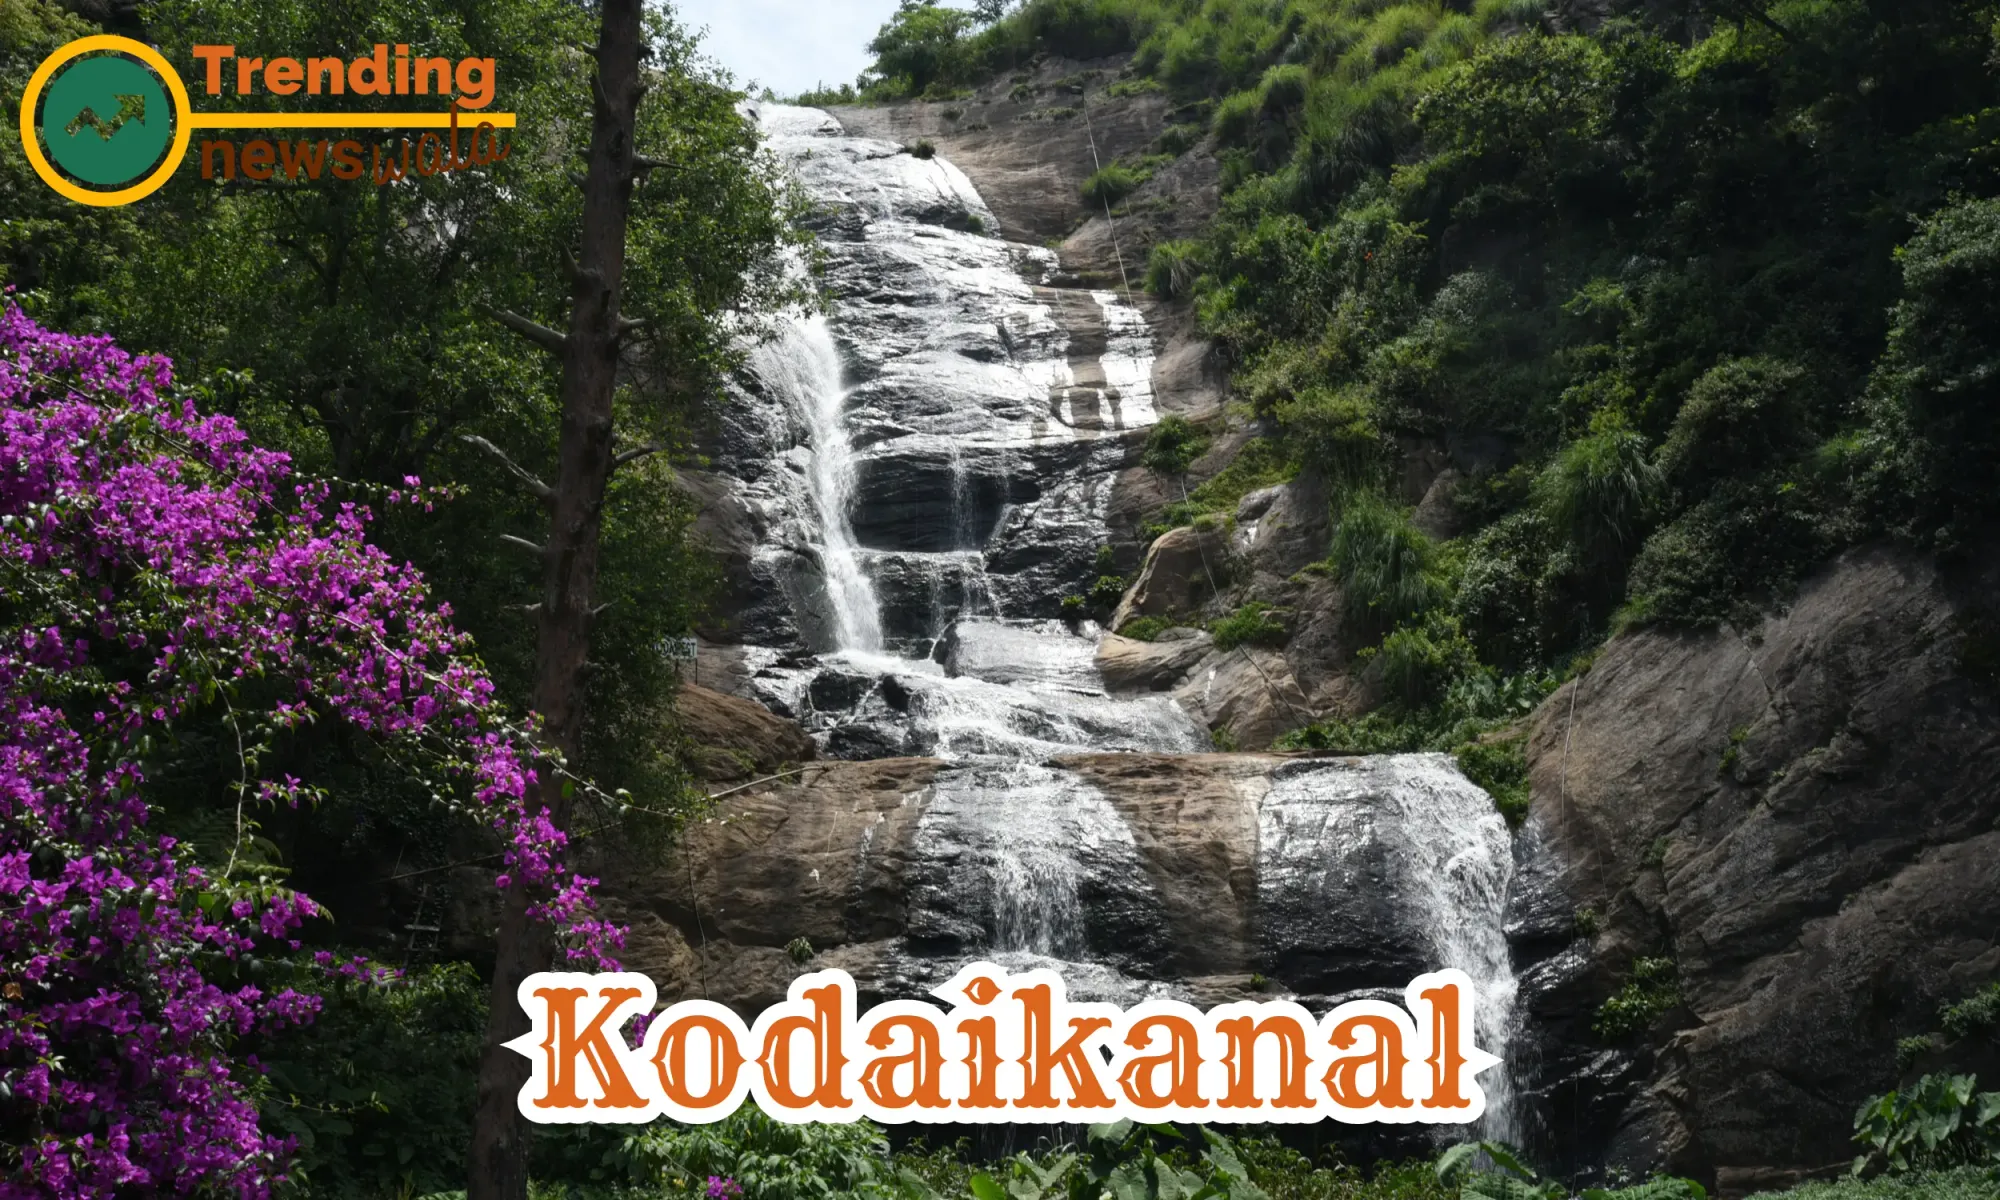 Kodaikanal is a charming hill station located in the southern Indian state of Tamil Nadu